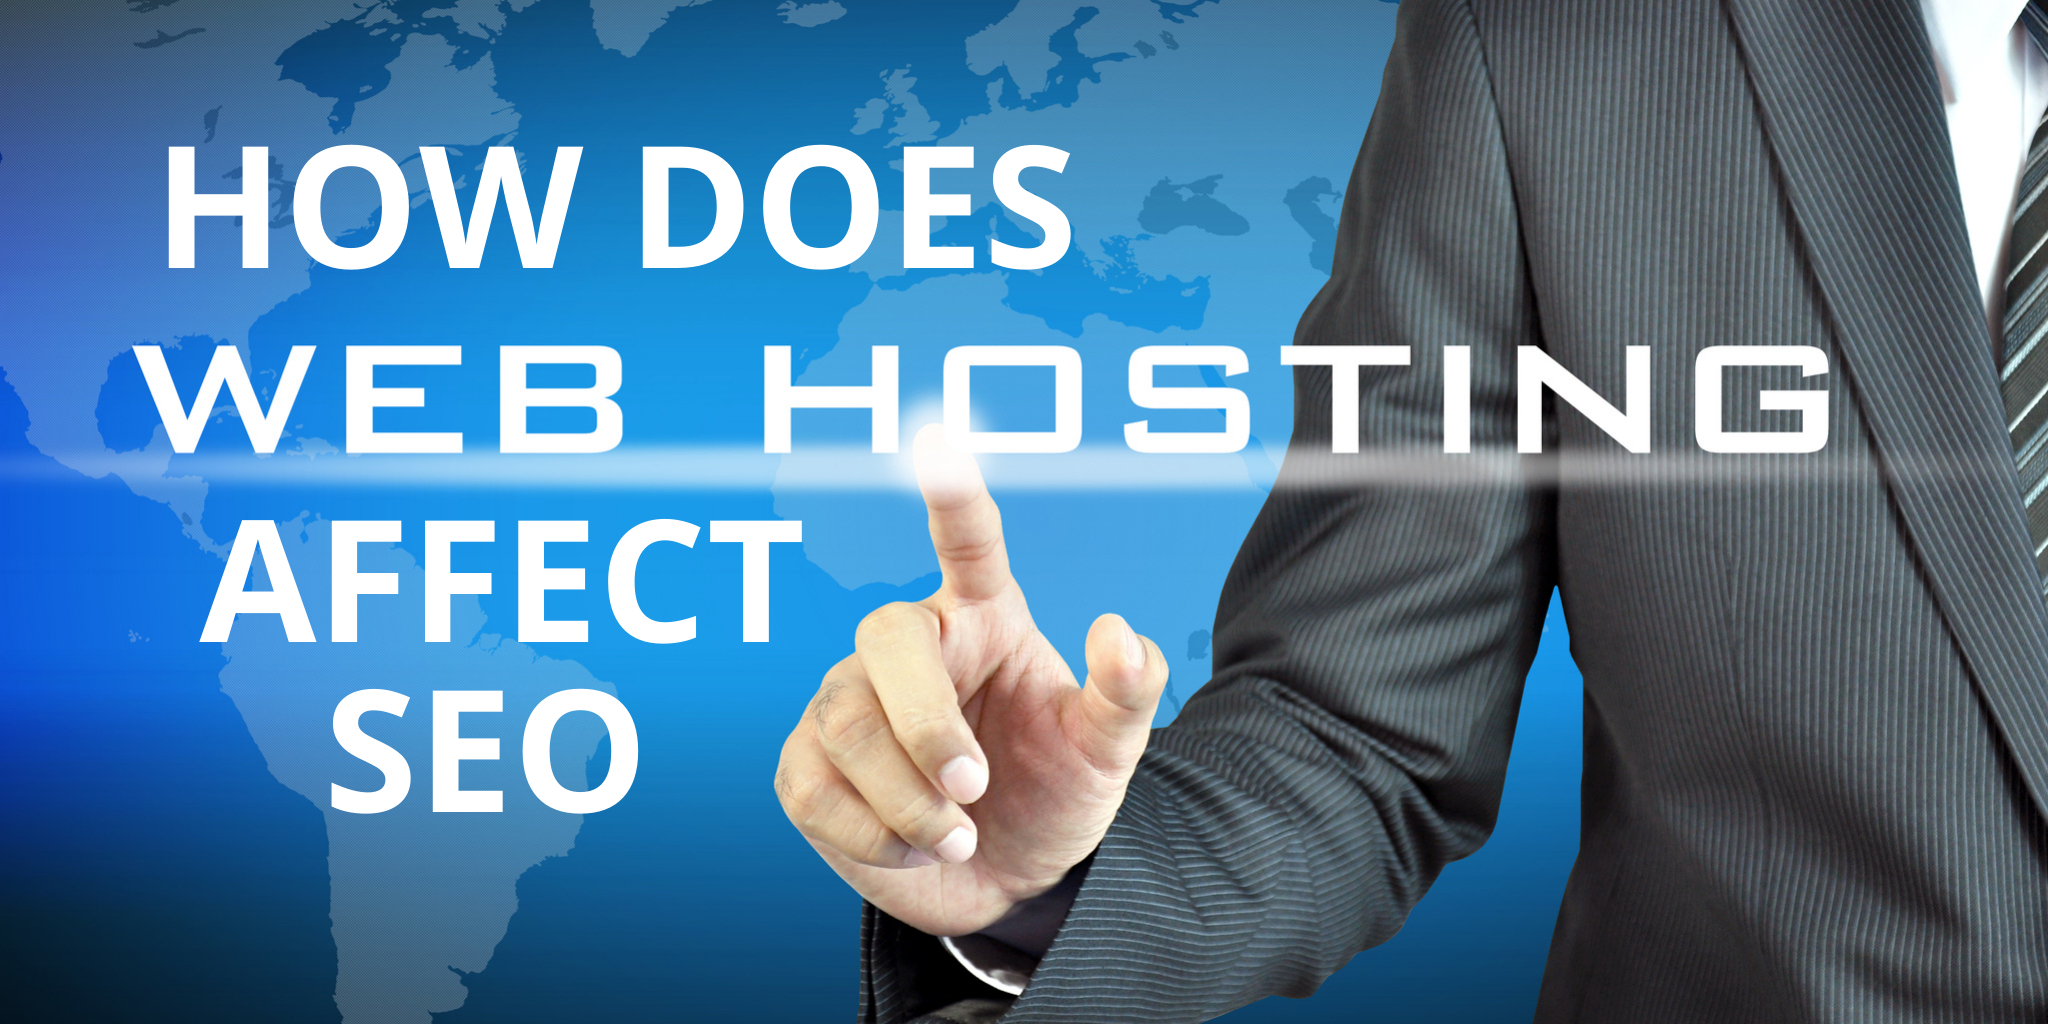 How does WebHosting Affect SEO